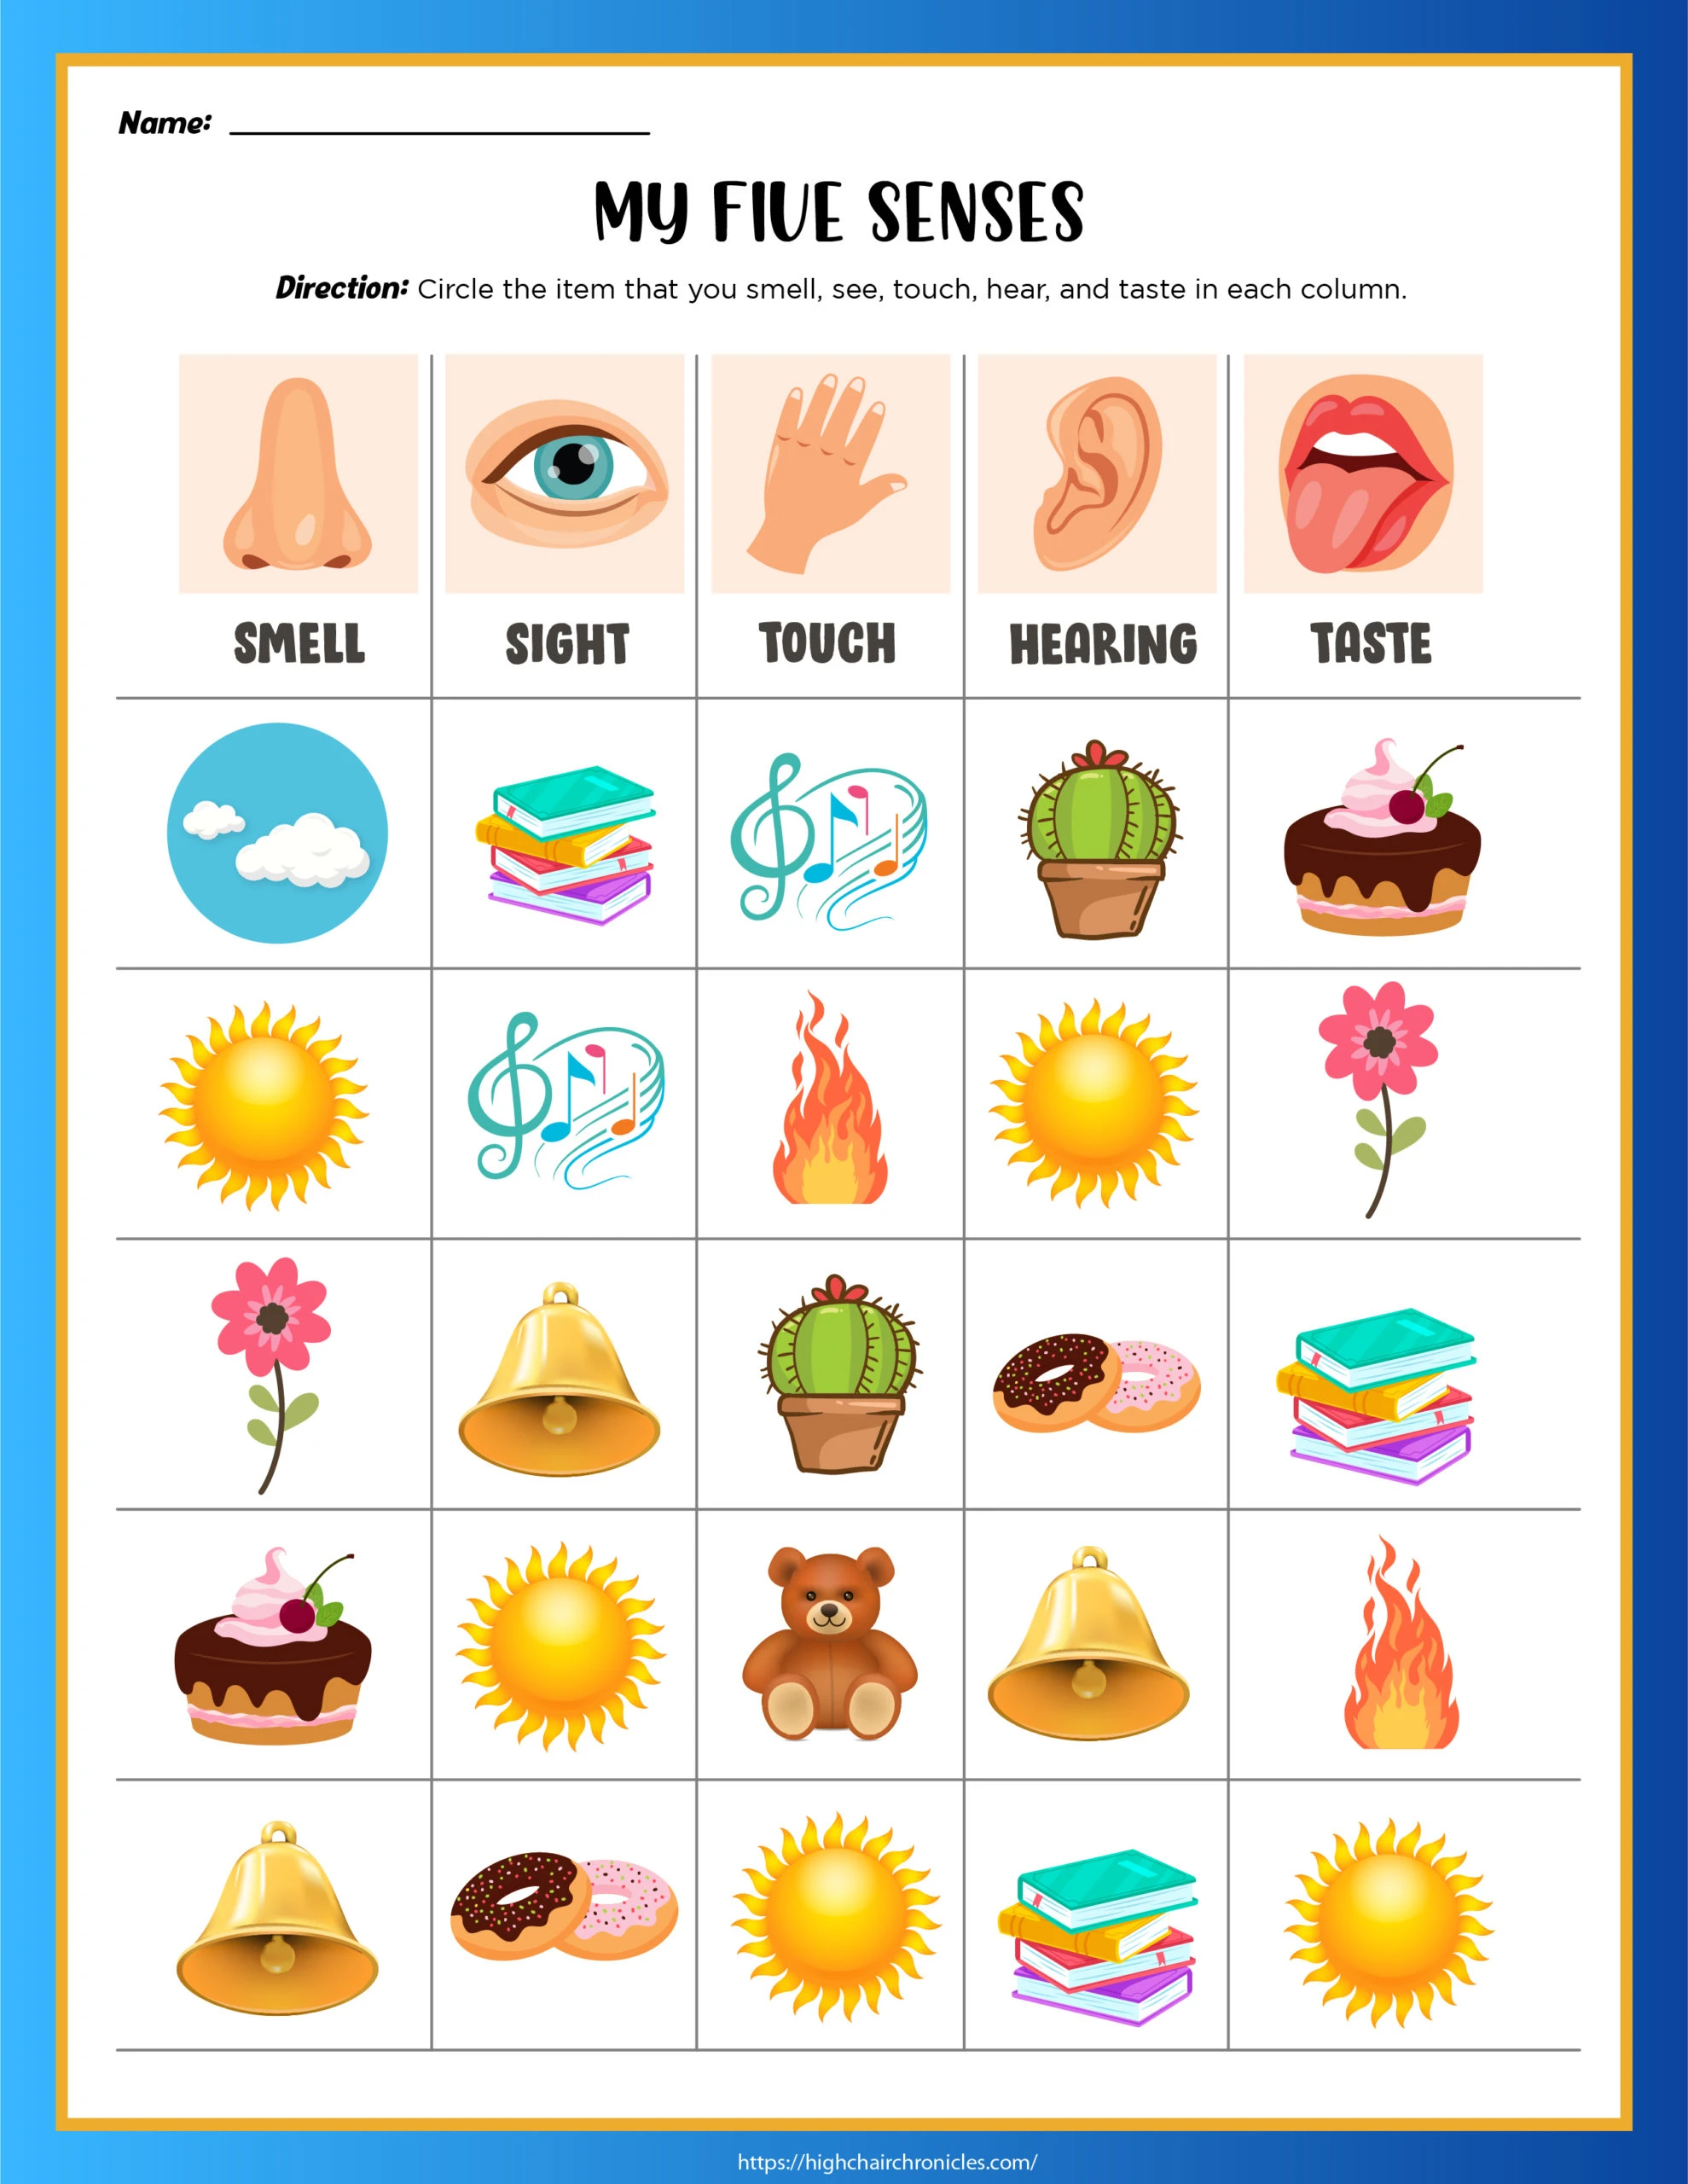 A page from the 5 senses activity worksheets